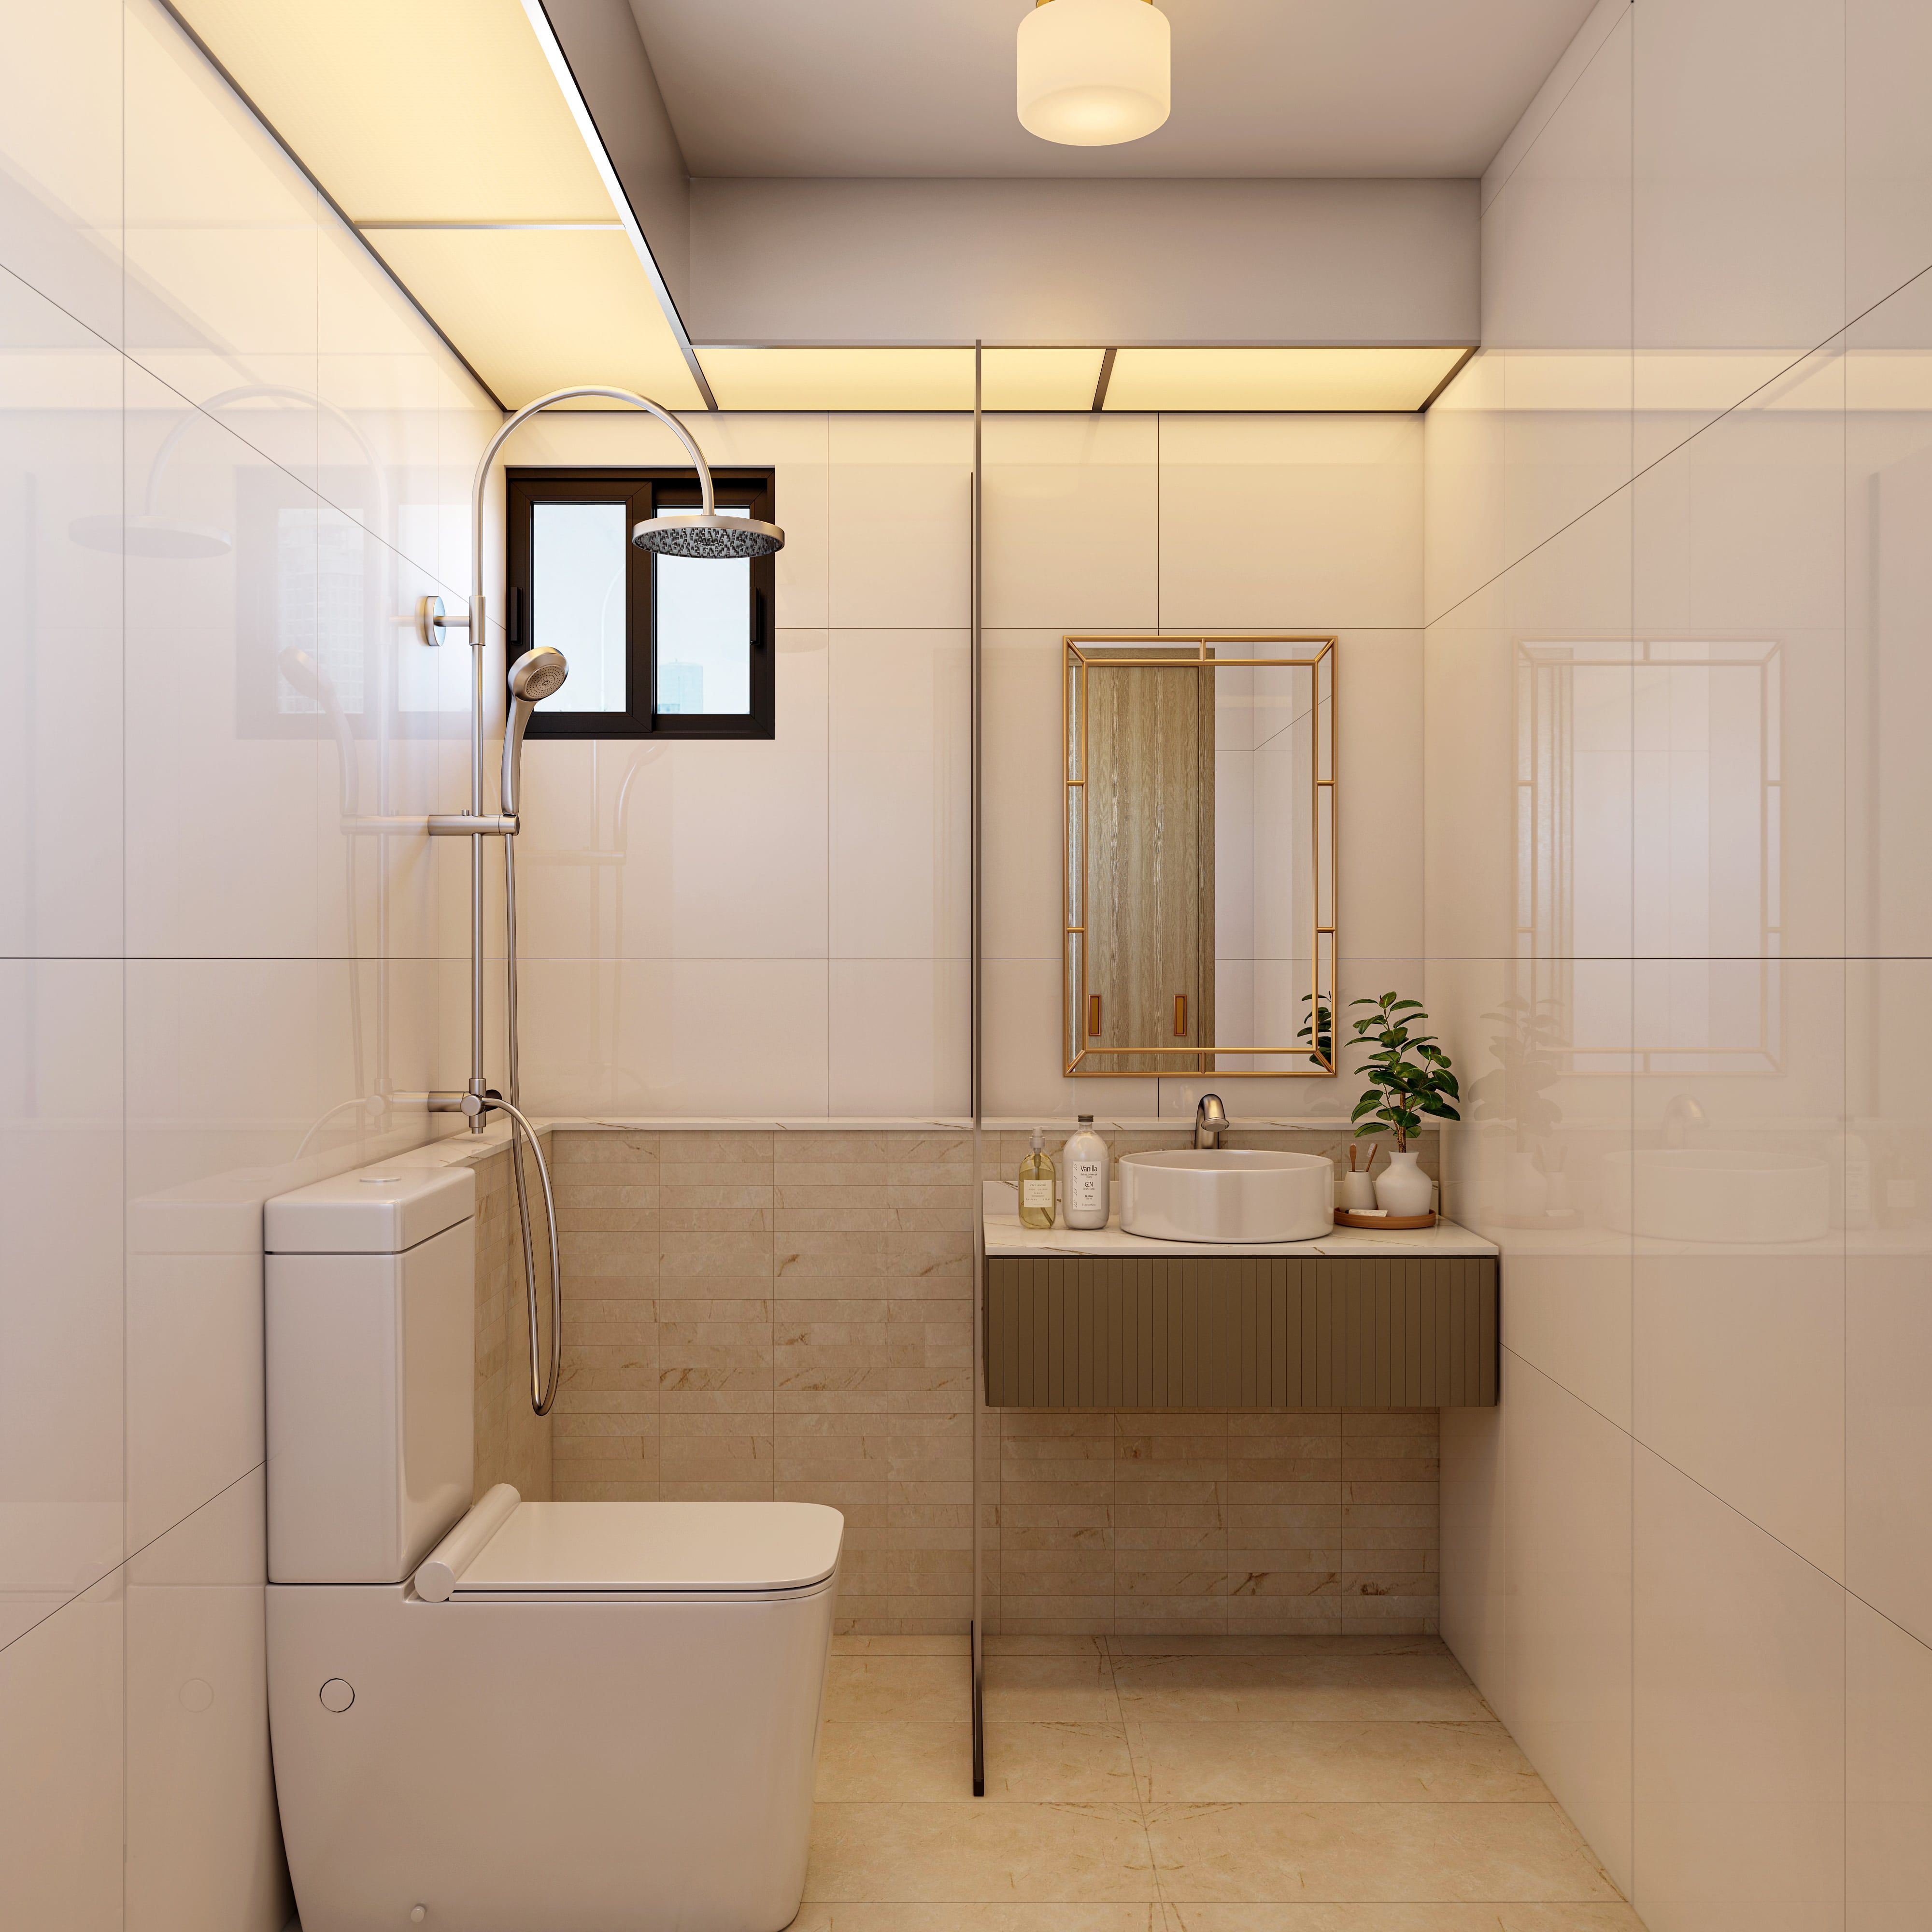 Contemporary Design With A Wall-Mounted Vanity For Bathrooms